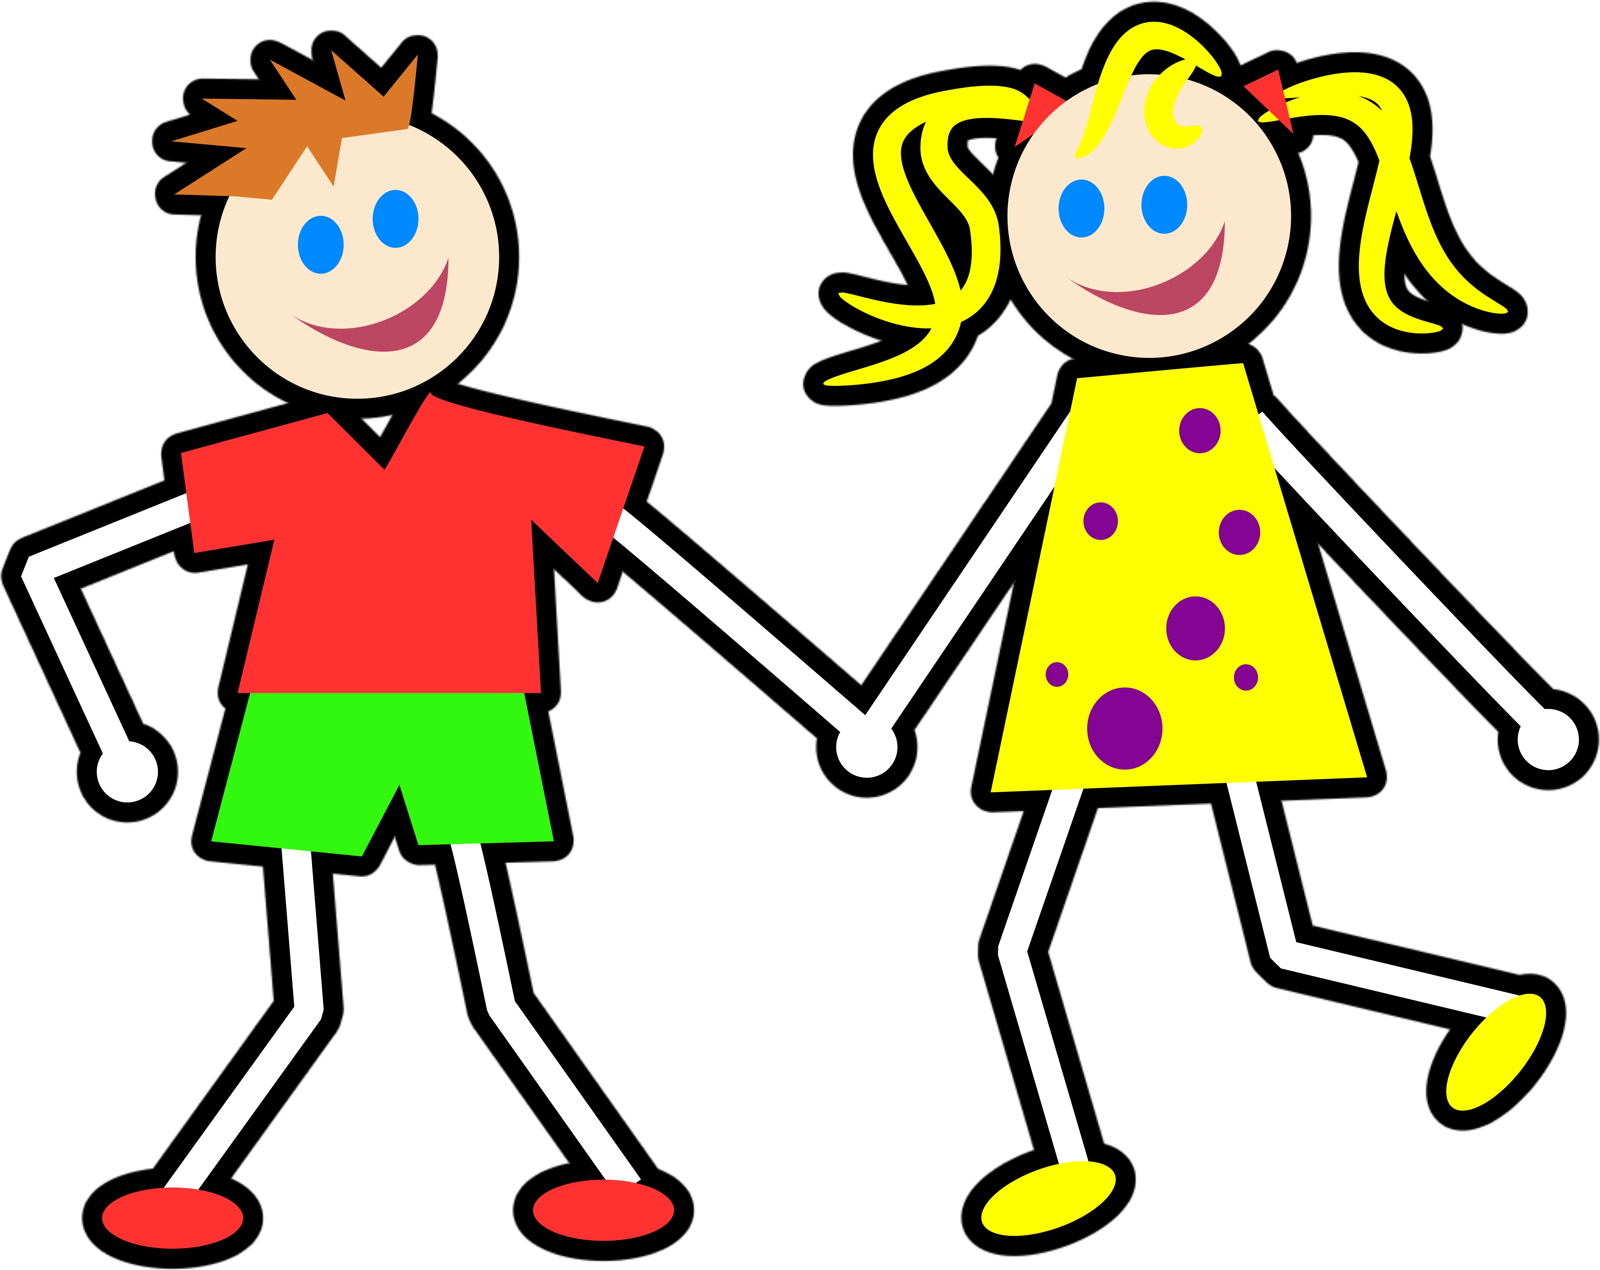 boy and girl holding hands clipart - photo #50